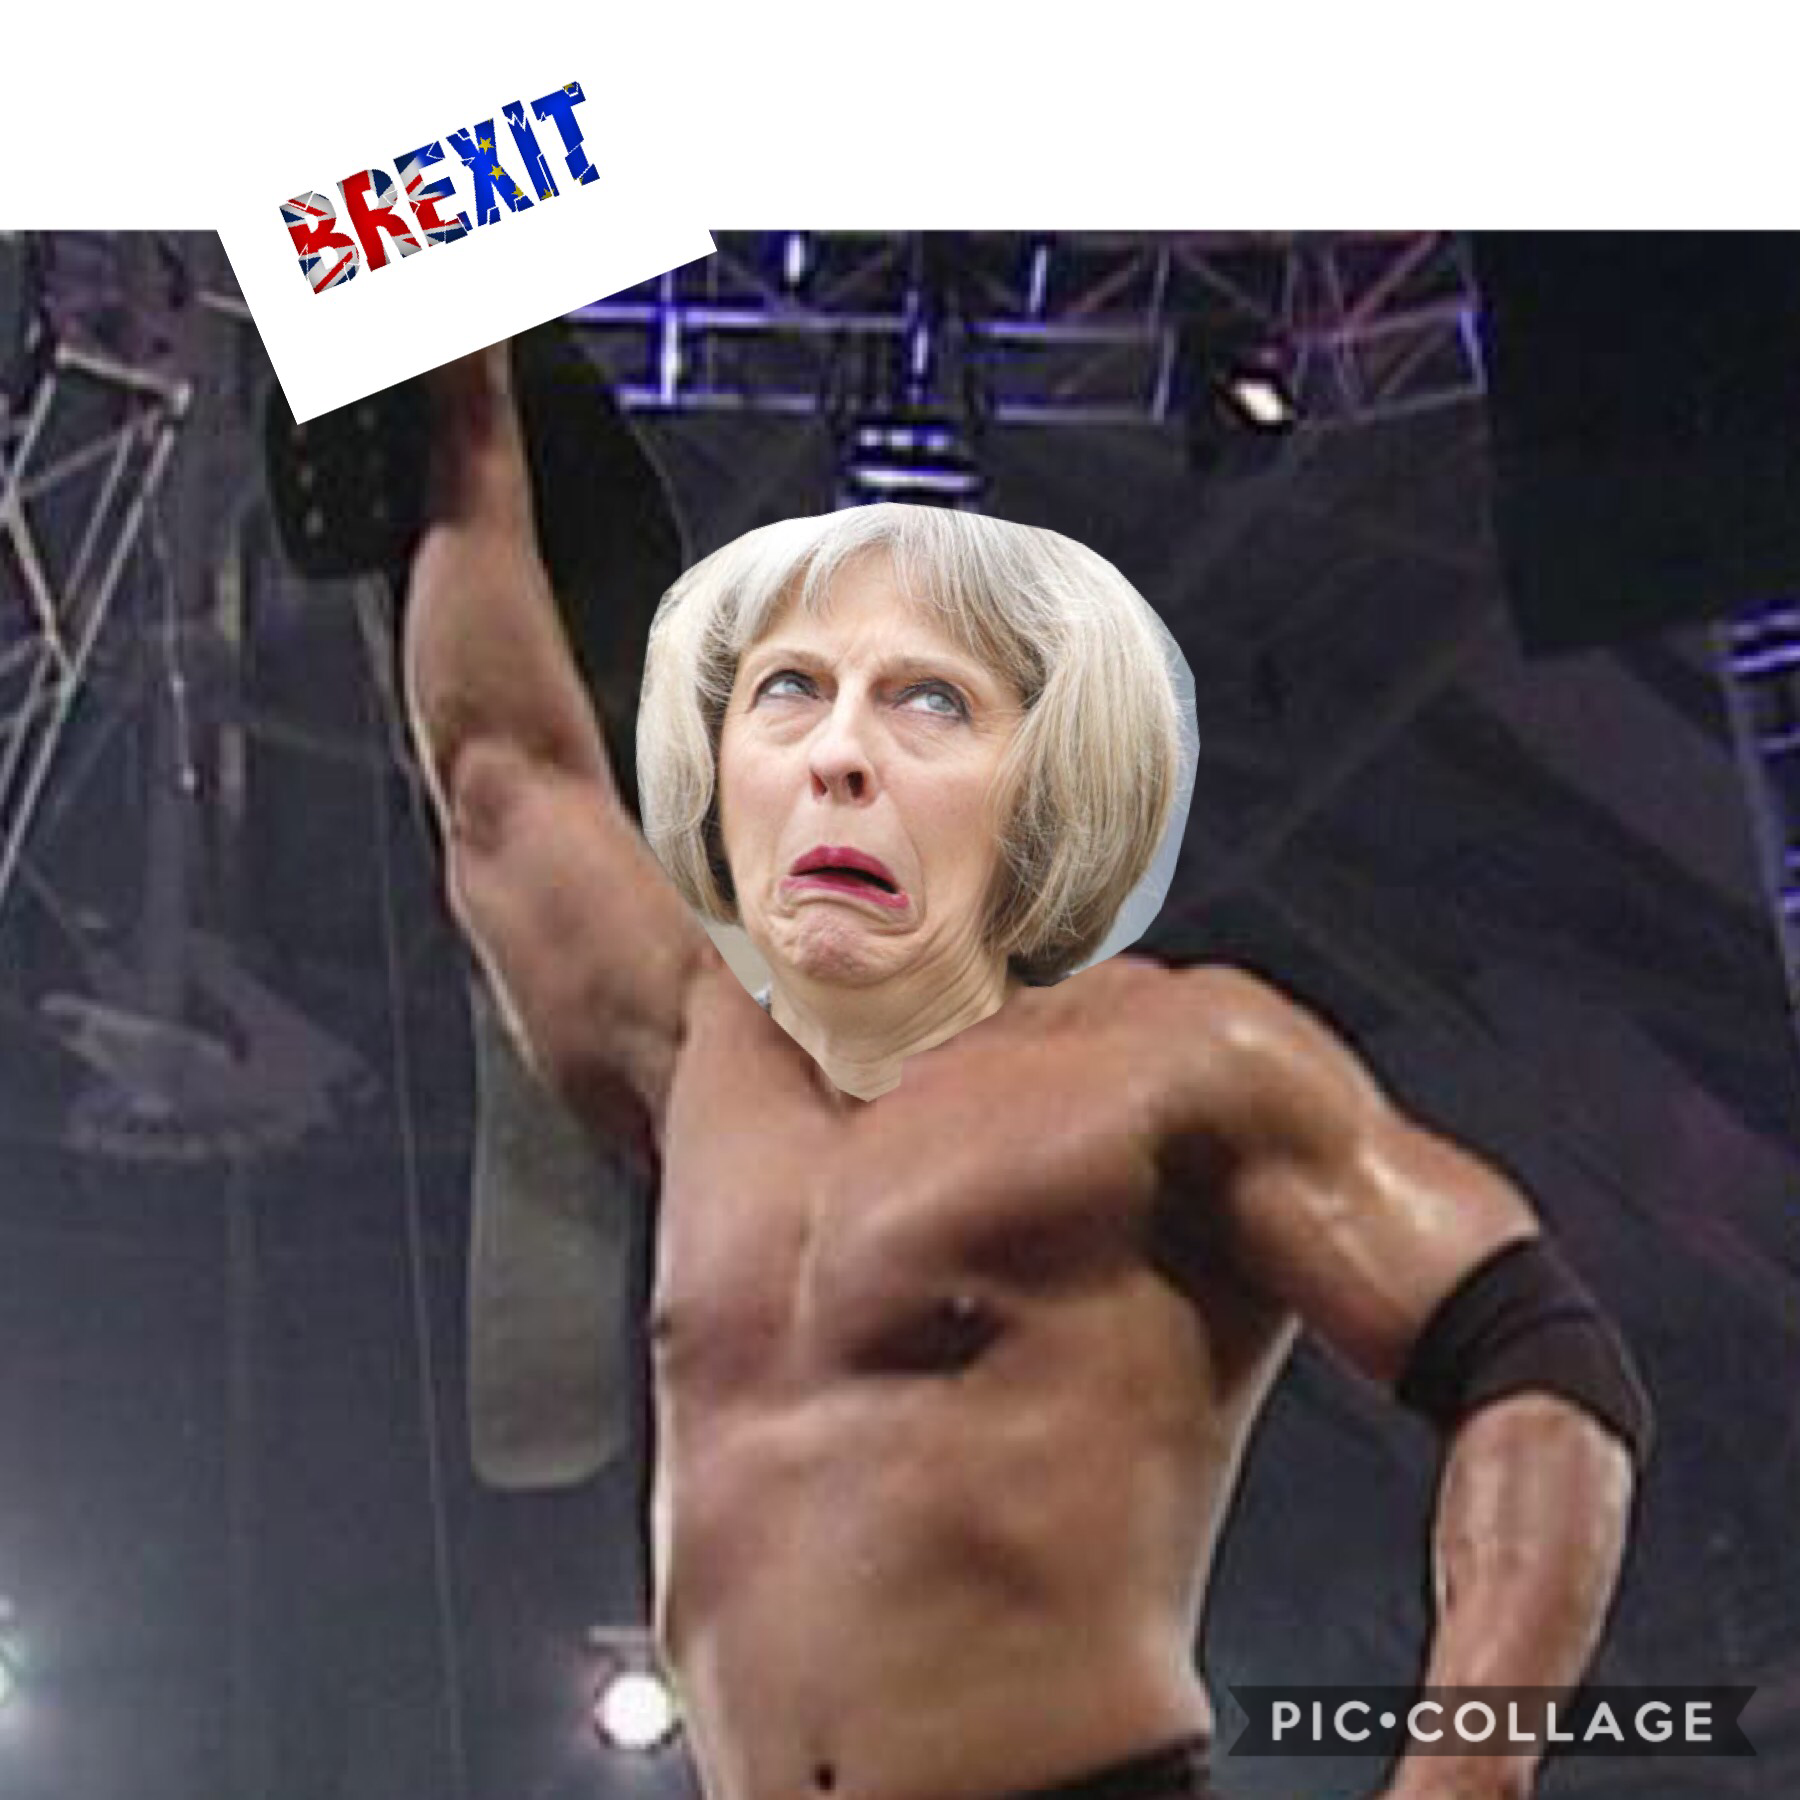 What we all think about Brexit...